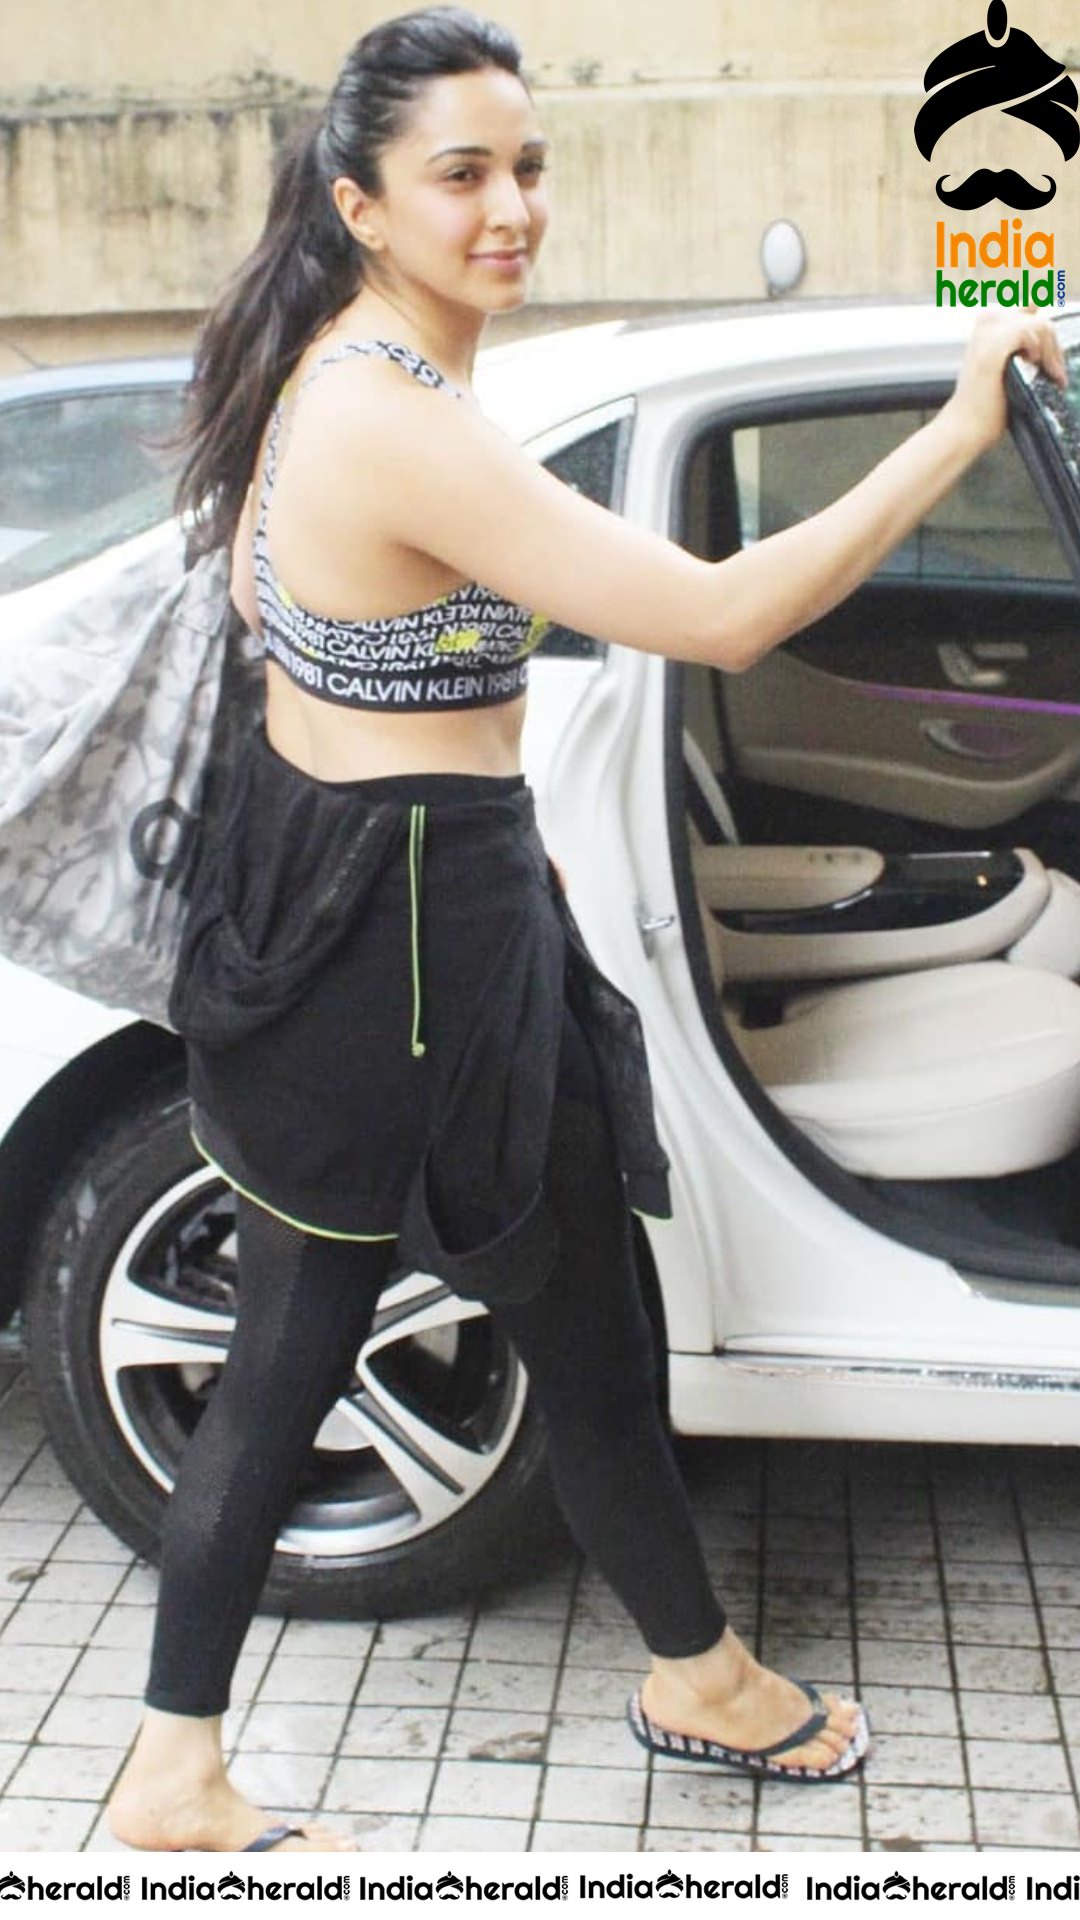 Kiara Advani Shows her Hotness by wearing Sports Bra while going to Pilates Class